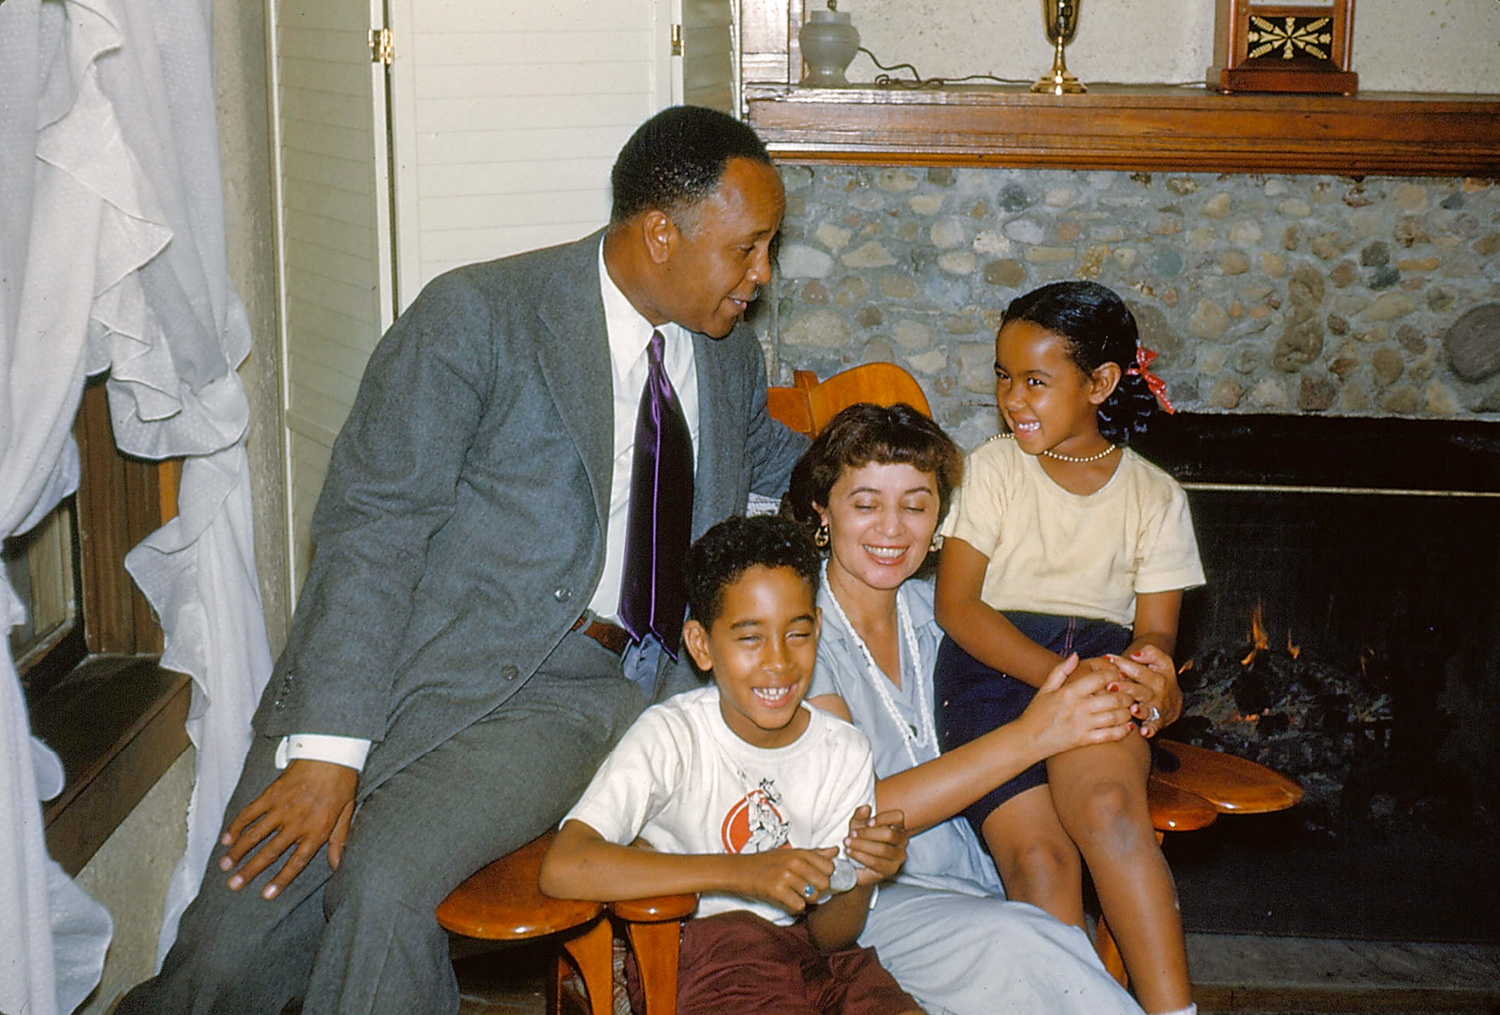 Percy Julian sits on the arm of a chair in which his wife and son are seated. His daughter sits on the opposite arm.